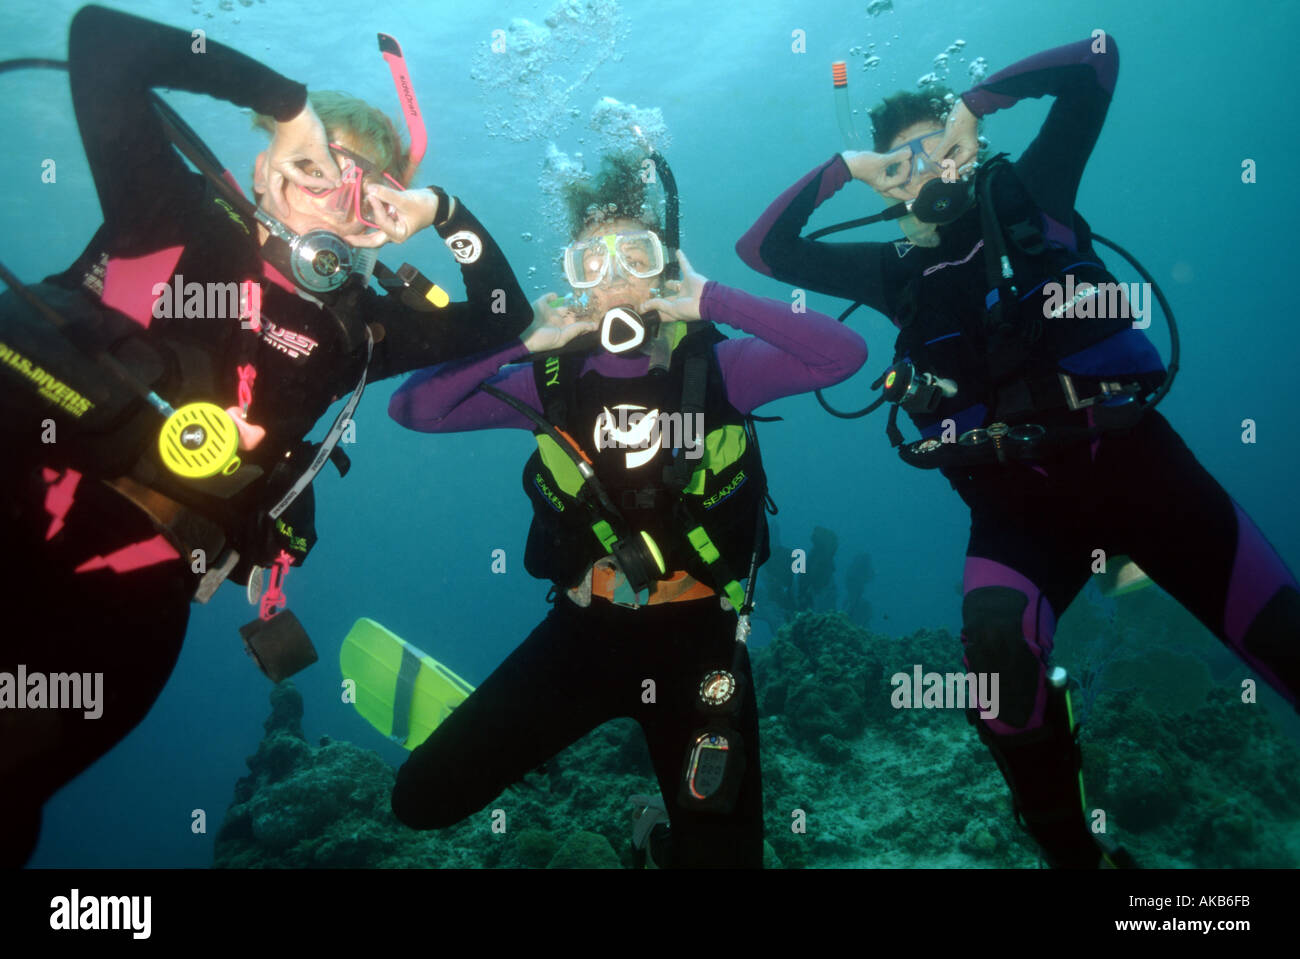 Hand signals and scuba diving in the blue Caribbean ocean can be fun and silly when there are three friends with whom to play am Stock Photo